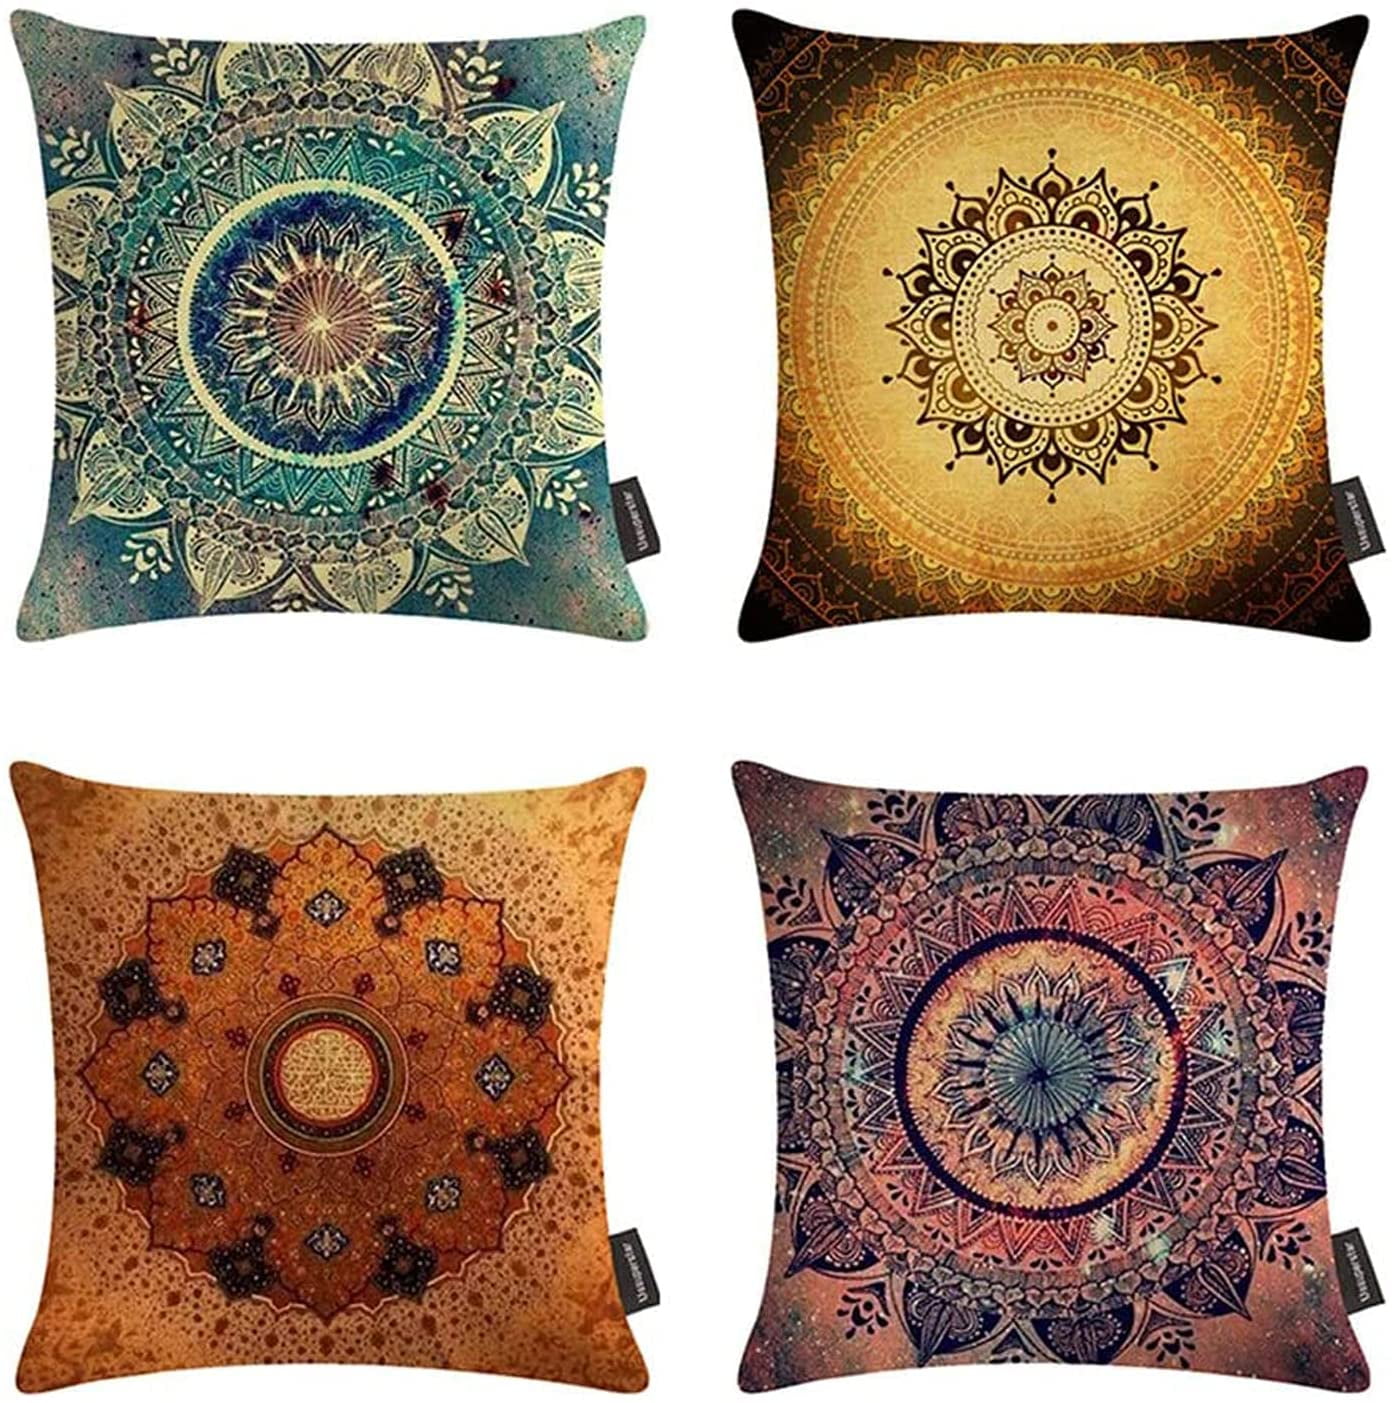 Blue Mandala 4Pack Bohemian Decorative Throw Pillow Covers Water Color Mandala Pattern Pillowcases Square Home Decorative Floral Cushion Covers 18 x 18 Inch for Sofa Bedroom Car Outdoor Cushions 